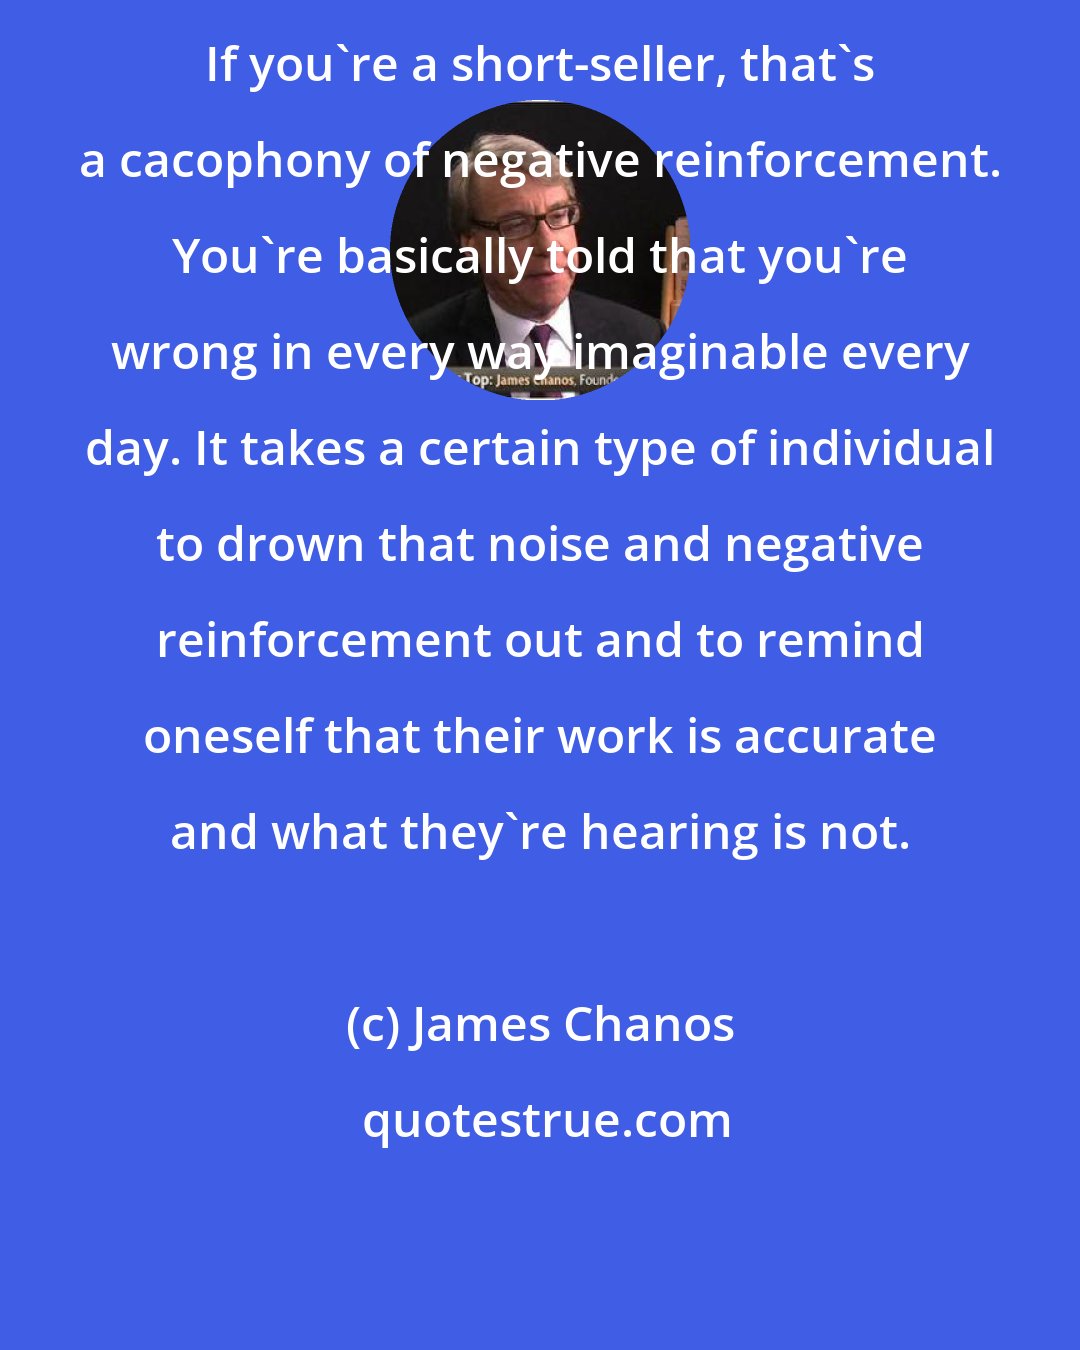 James Chanos: If you're a short-seller, that's a cacophony of negative reinforcement. You're basically told that you're wrong in every way imaginable every day. It takes a certain type of individual to drown that noise and negative reinforcement out and to remind oneself that their work is accurate and what they're hearing is not.